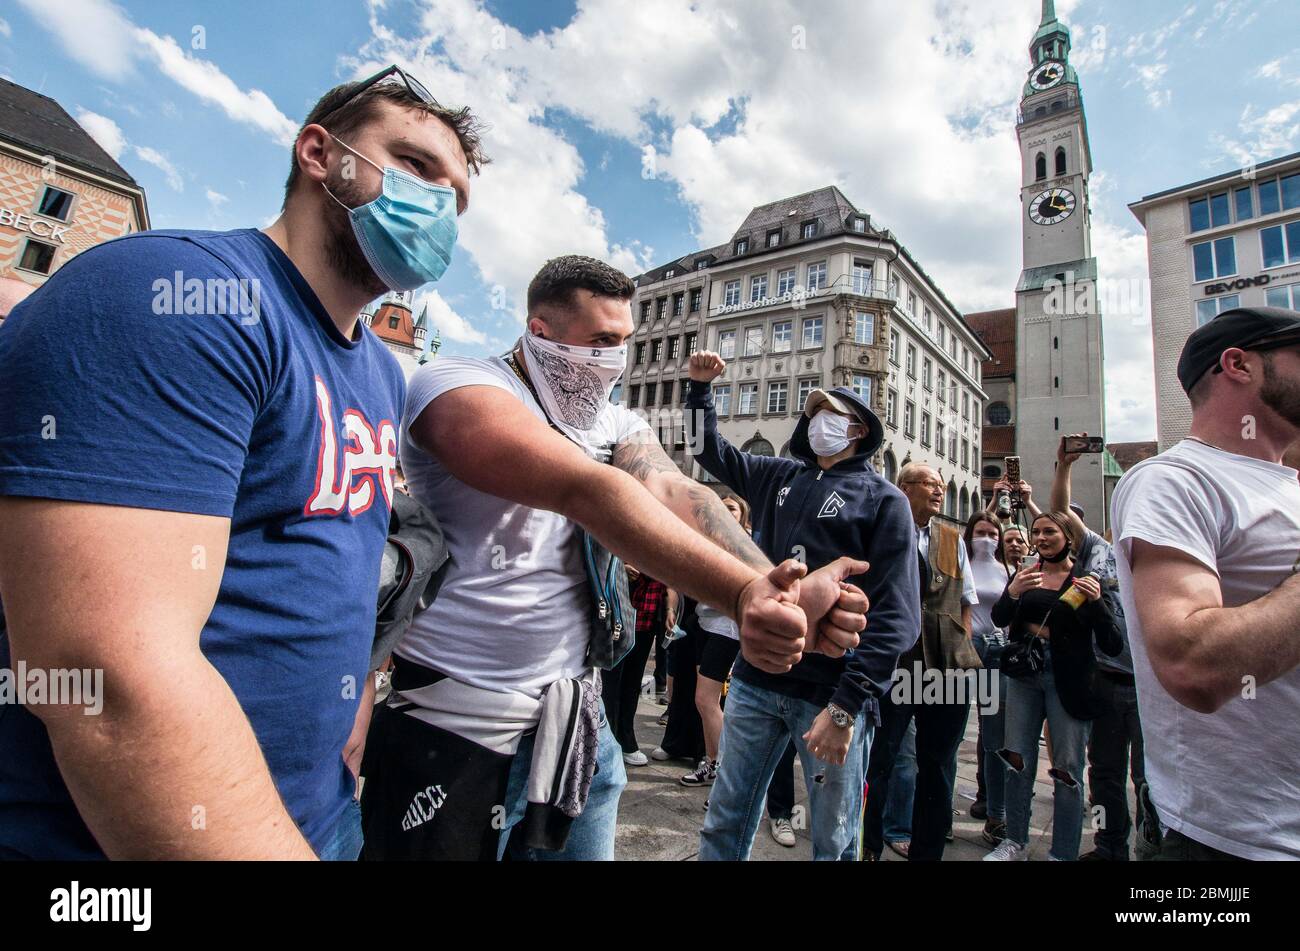 Munich, Bavaria, Germany. 9th May, 2020. Demonstrators who were part of a hooligan block were trying to incite a conflict or riot against police began changing ''wir sind das Volk'' and ''Widerstand'', as well as approaching police intimidatingly. Despite ongoing relaxing measures, a 'Querfront'' (cross-front) mixture of 3,000 conspiracy theorists, QAnon followers, right-extremists, AfD figures, neonazis, hooligans, and Widerstand2020 assembled for a third weekend in Munich's city center, primarily at Marienplatz, to demonstrate for restoration of the Grundgesetz amid the Coronavirus crisis Stock Photo